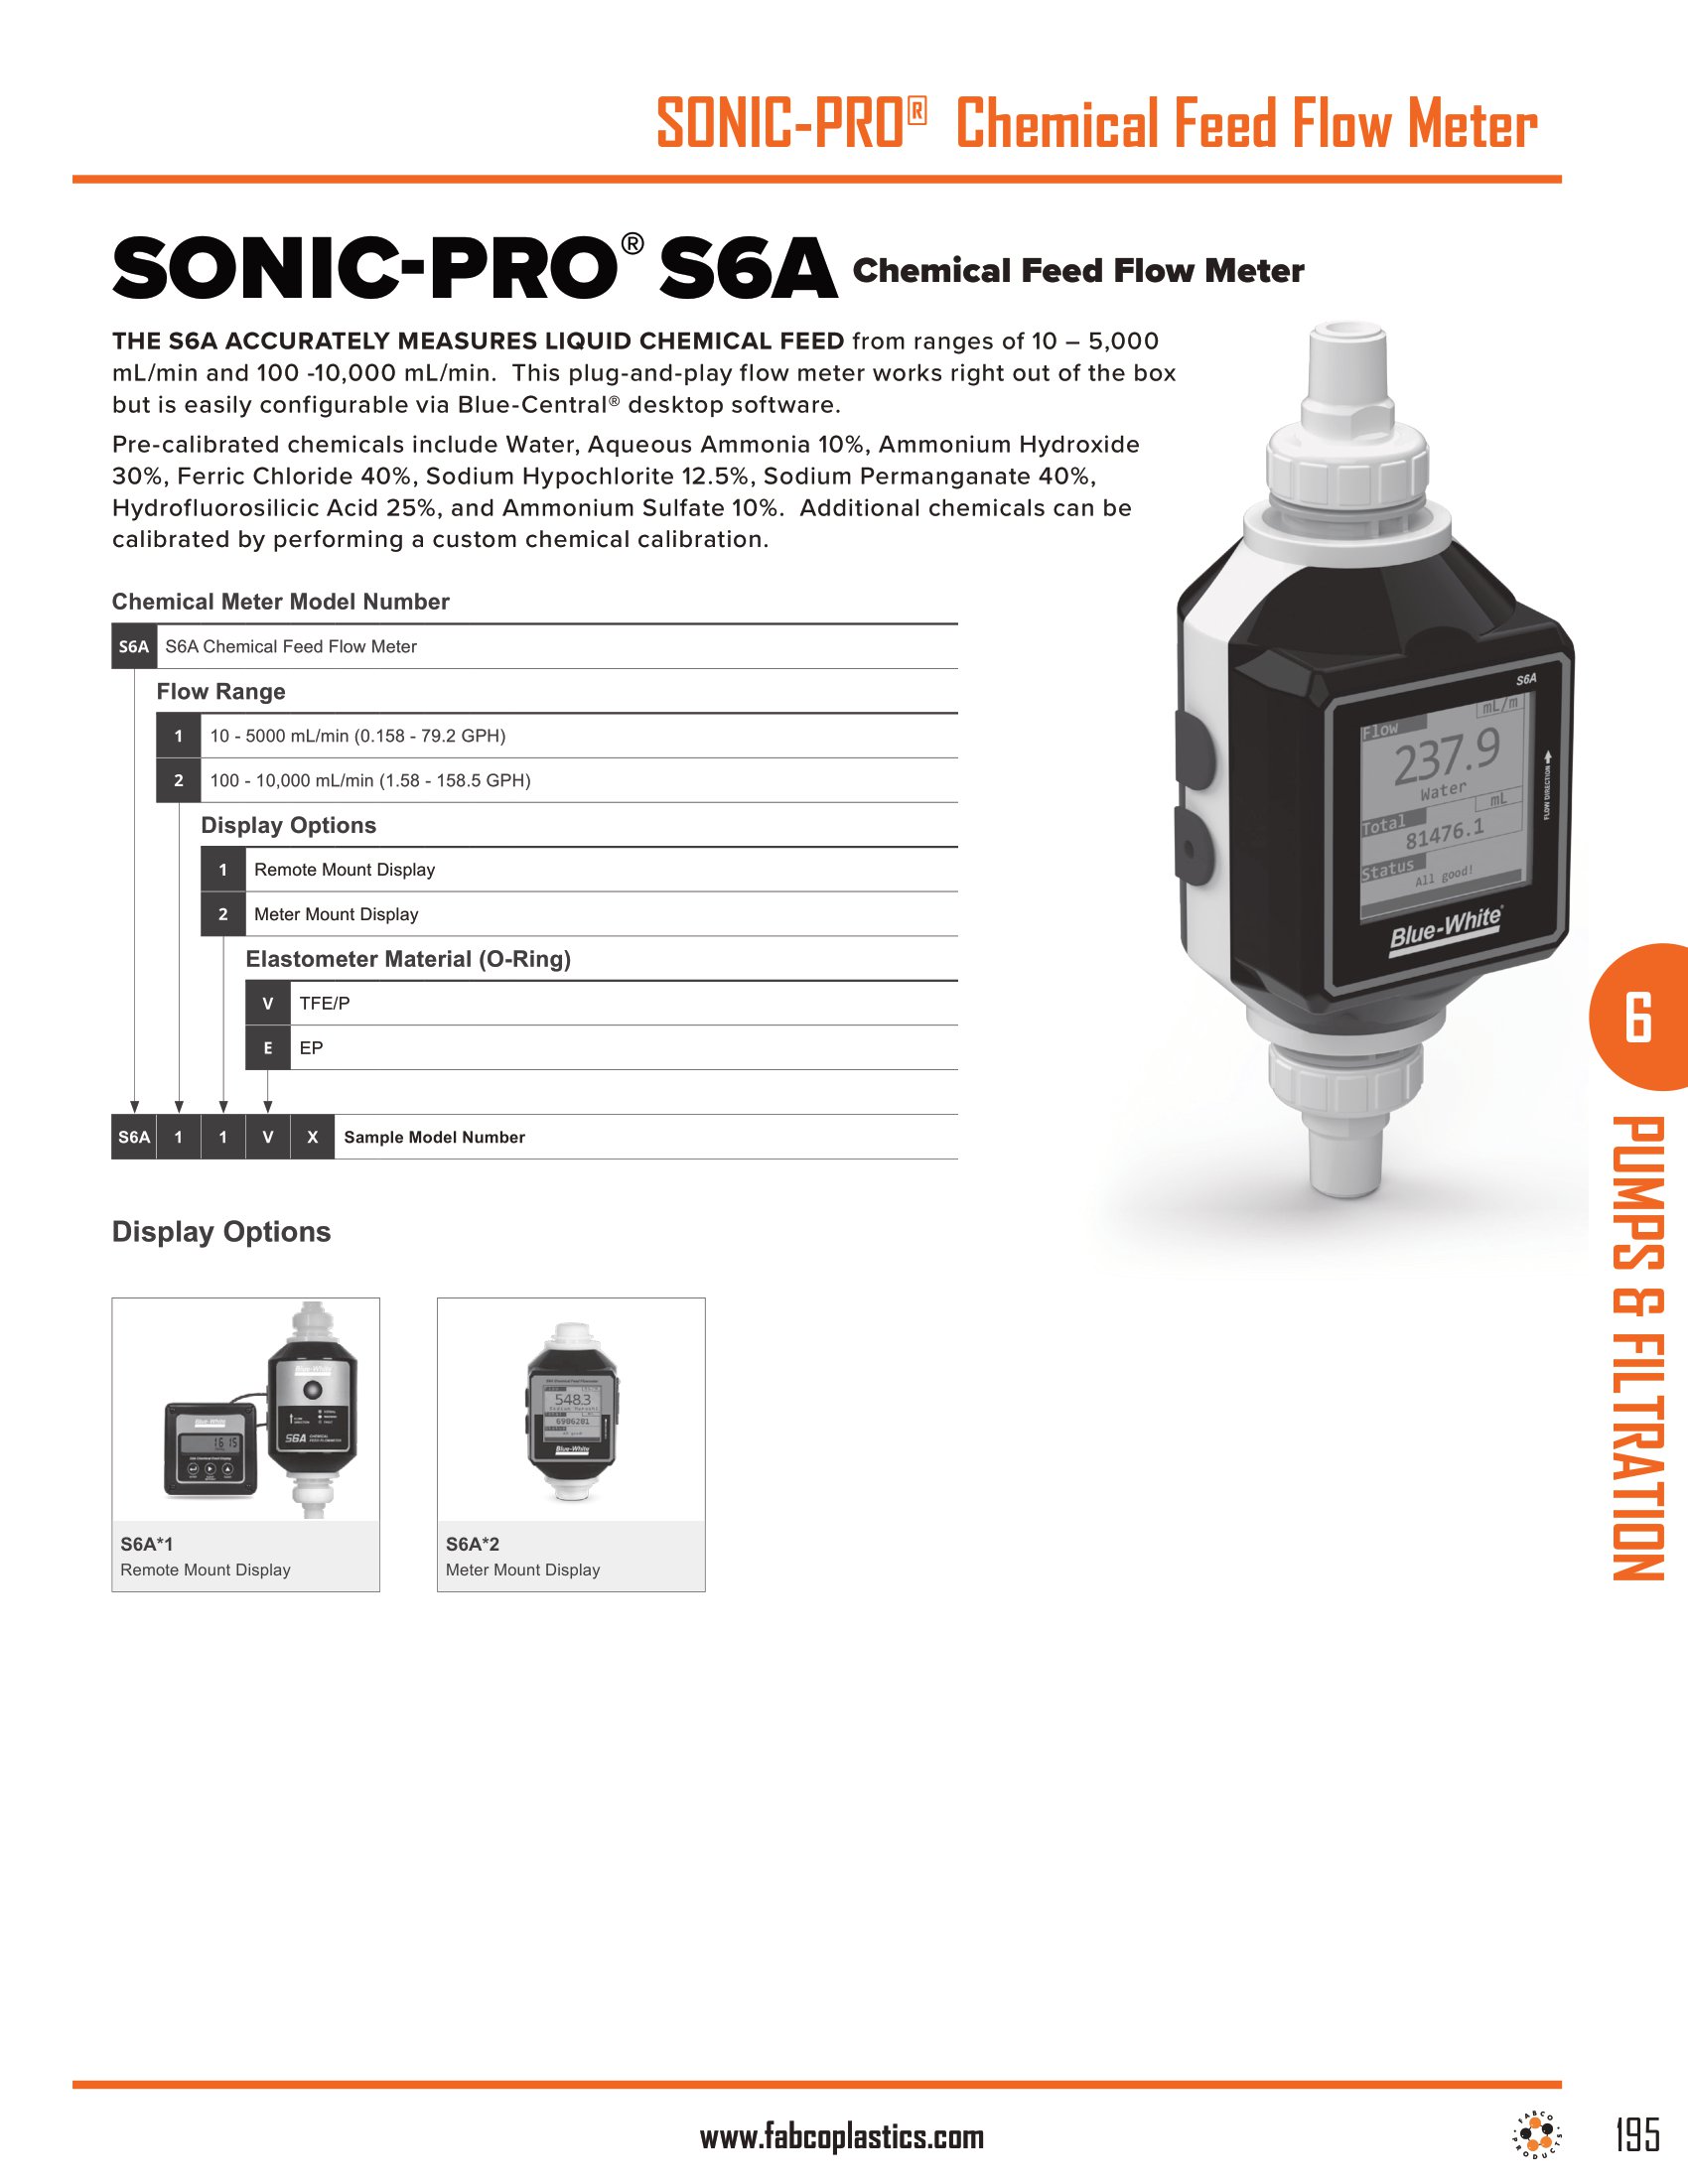 SONIC-PRO Chemical Feed Flow Meter